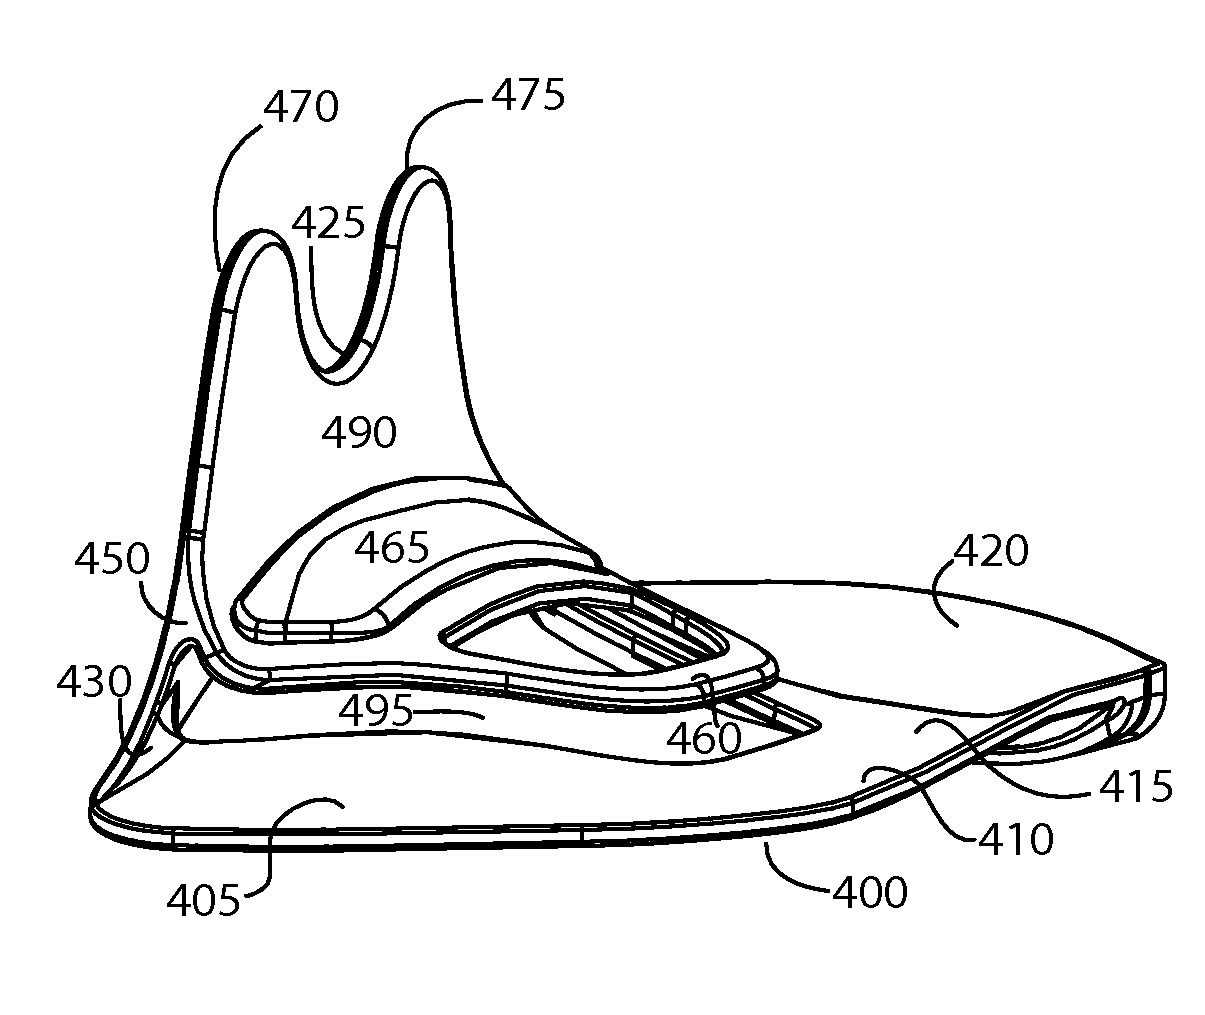 Orthtic device and method for providing static and dynamic stability to the medial arch and subtalar bone complex